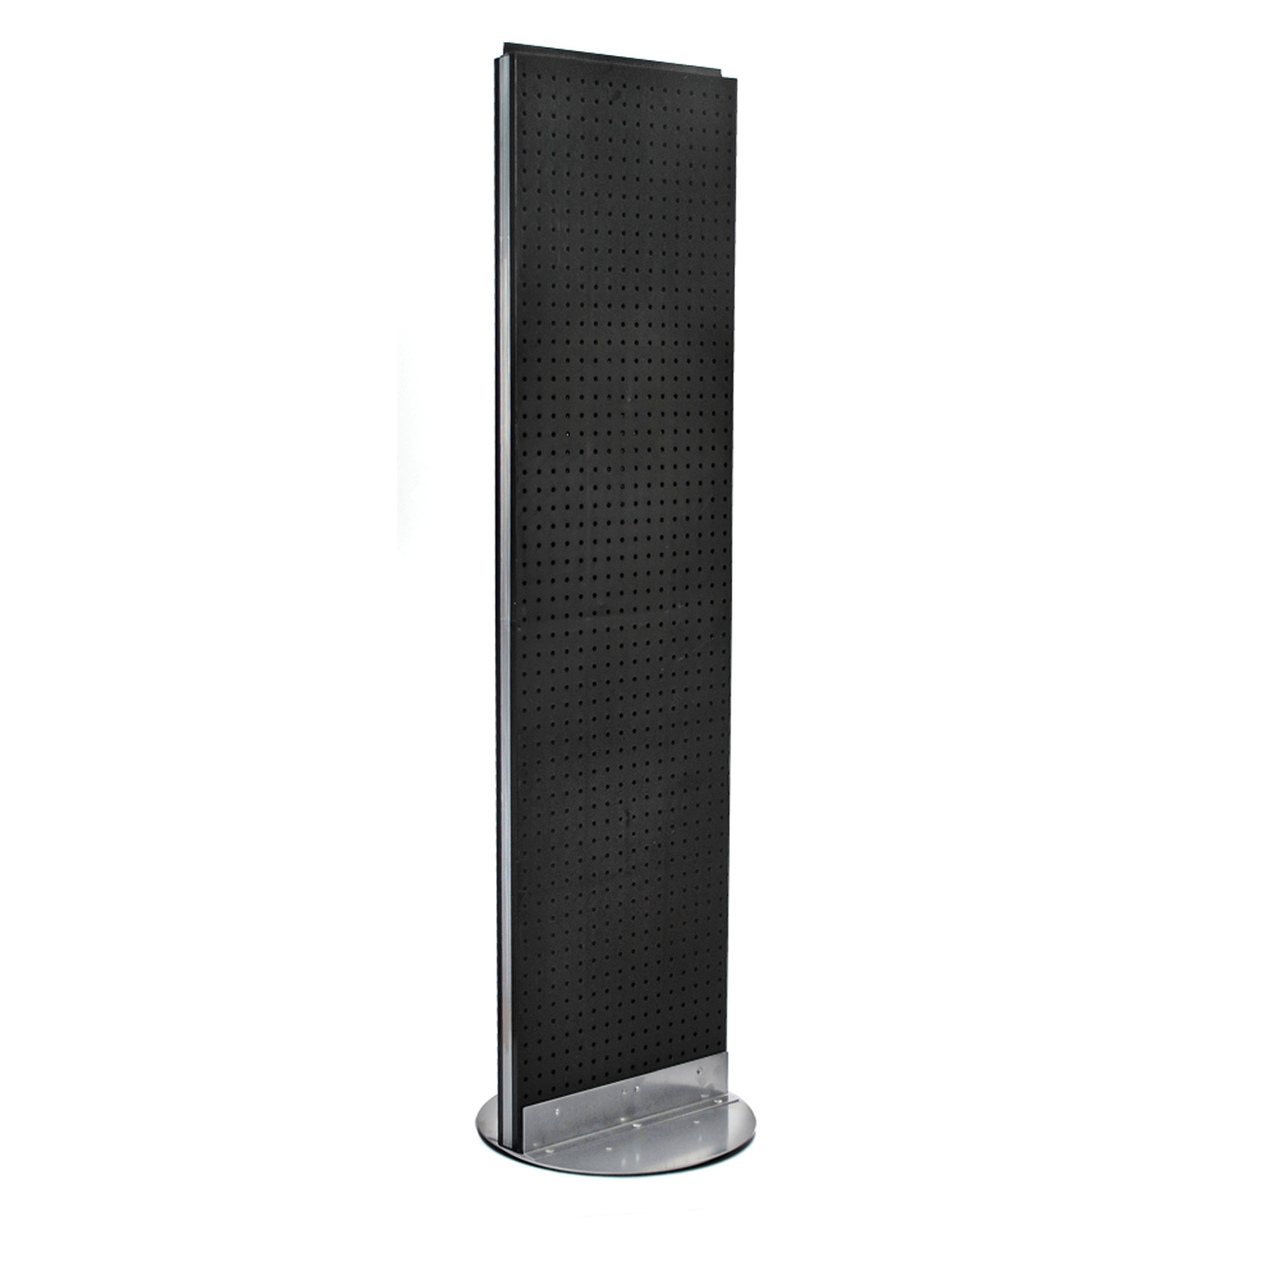 Azar Displays 700250-BLK Black Two-Sided Pegboard Floor Display on Revolving Base. Spinner Rack Stand. Panel Size: 16"W x 60"H - image 1 of 3